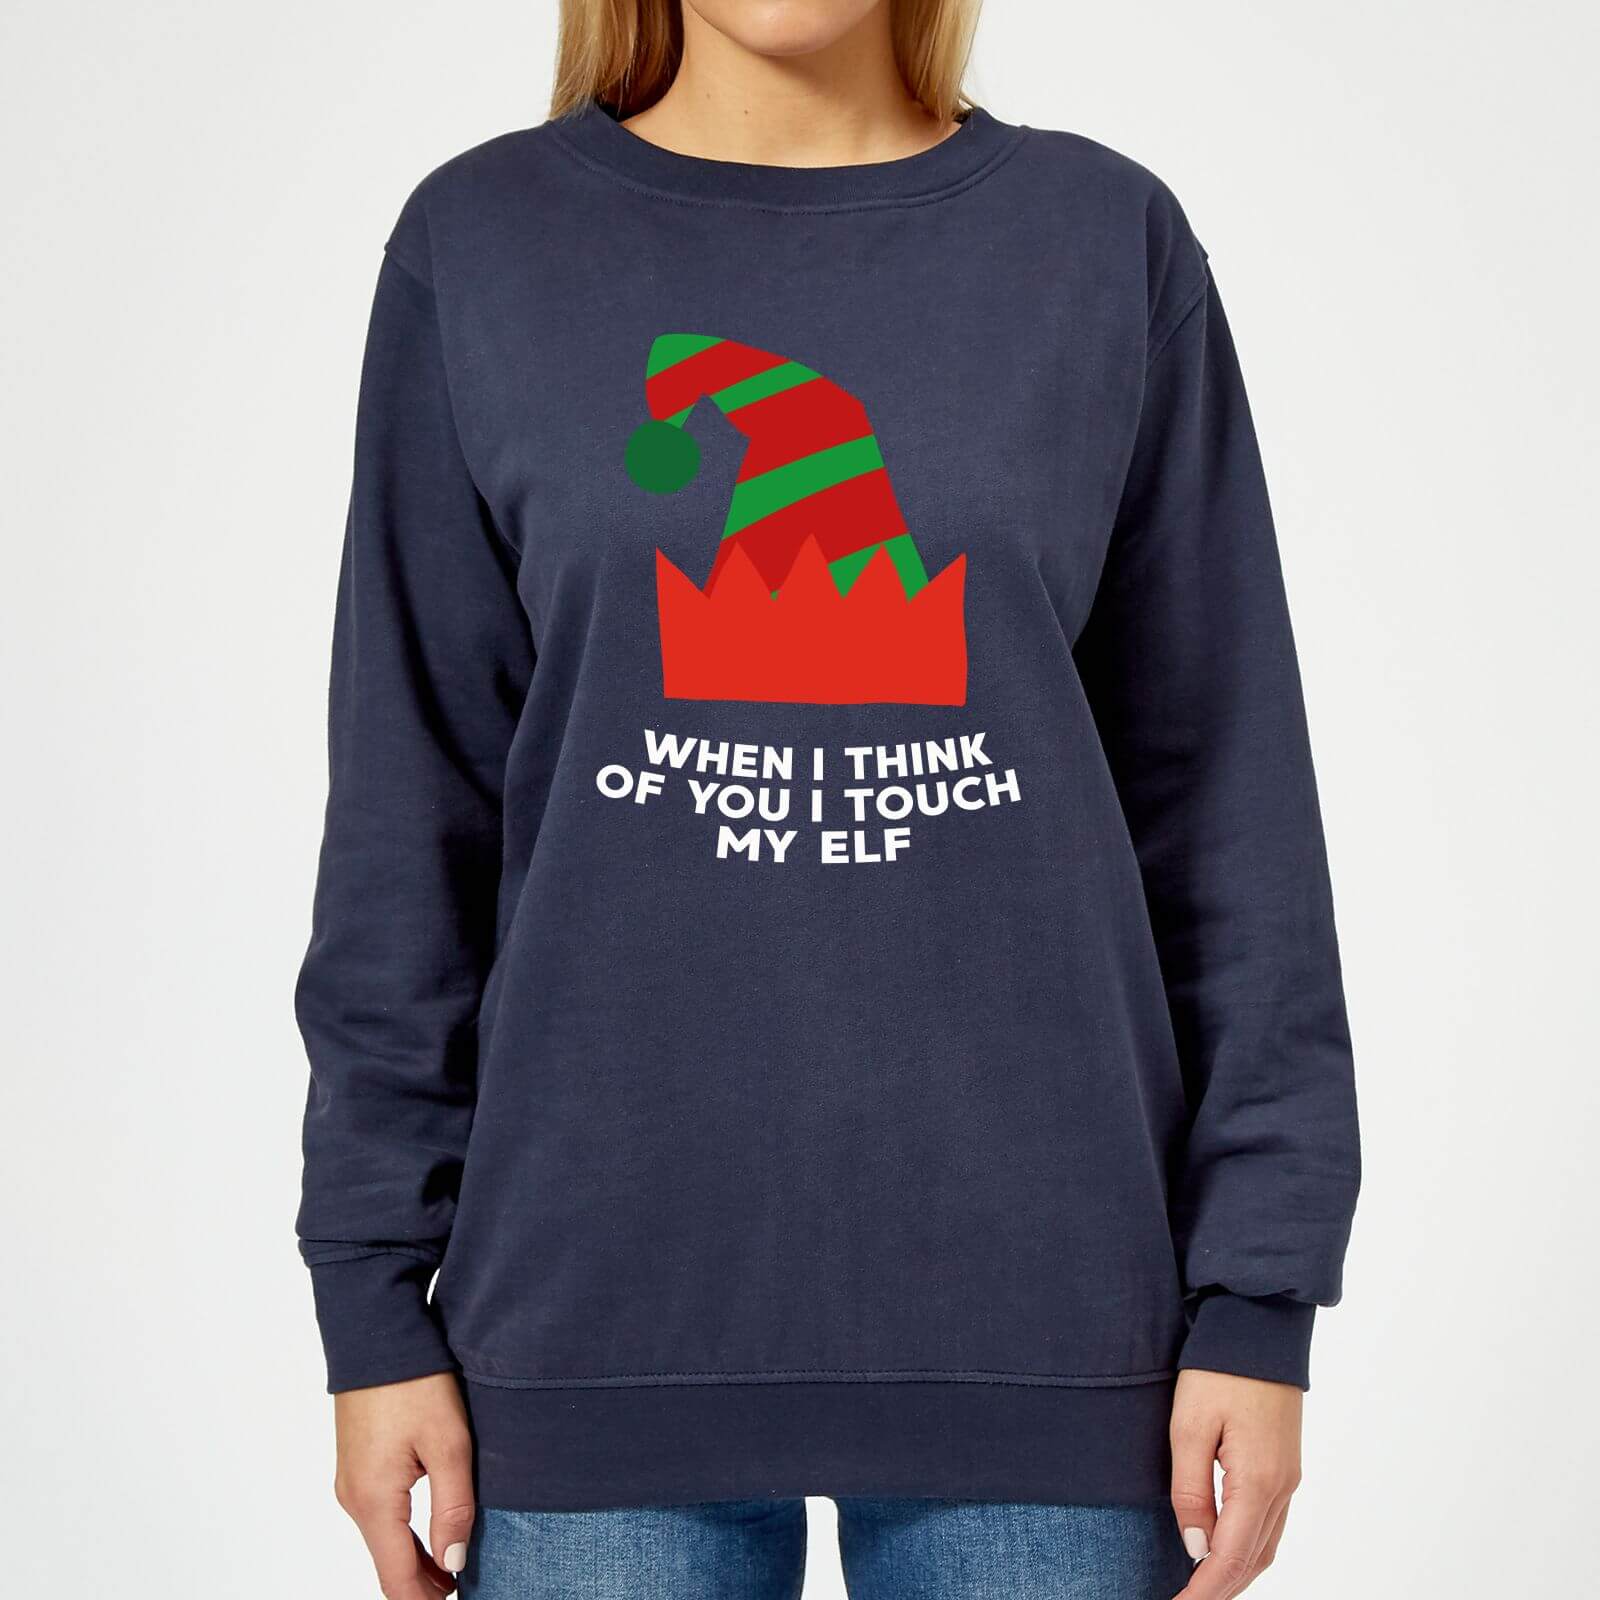 When I Think Of You I Touch My Elf Women's Christmas Sweatshirt - Navy - XS